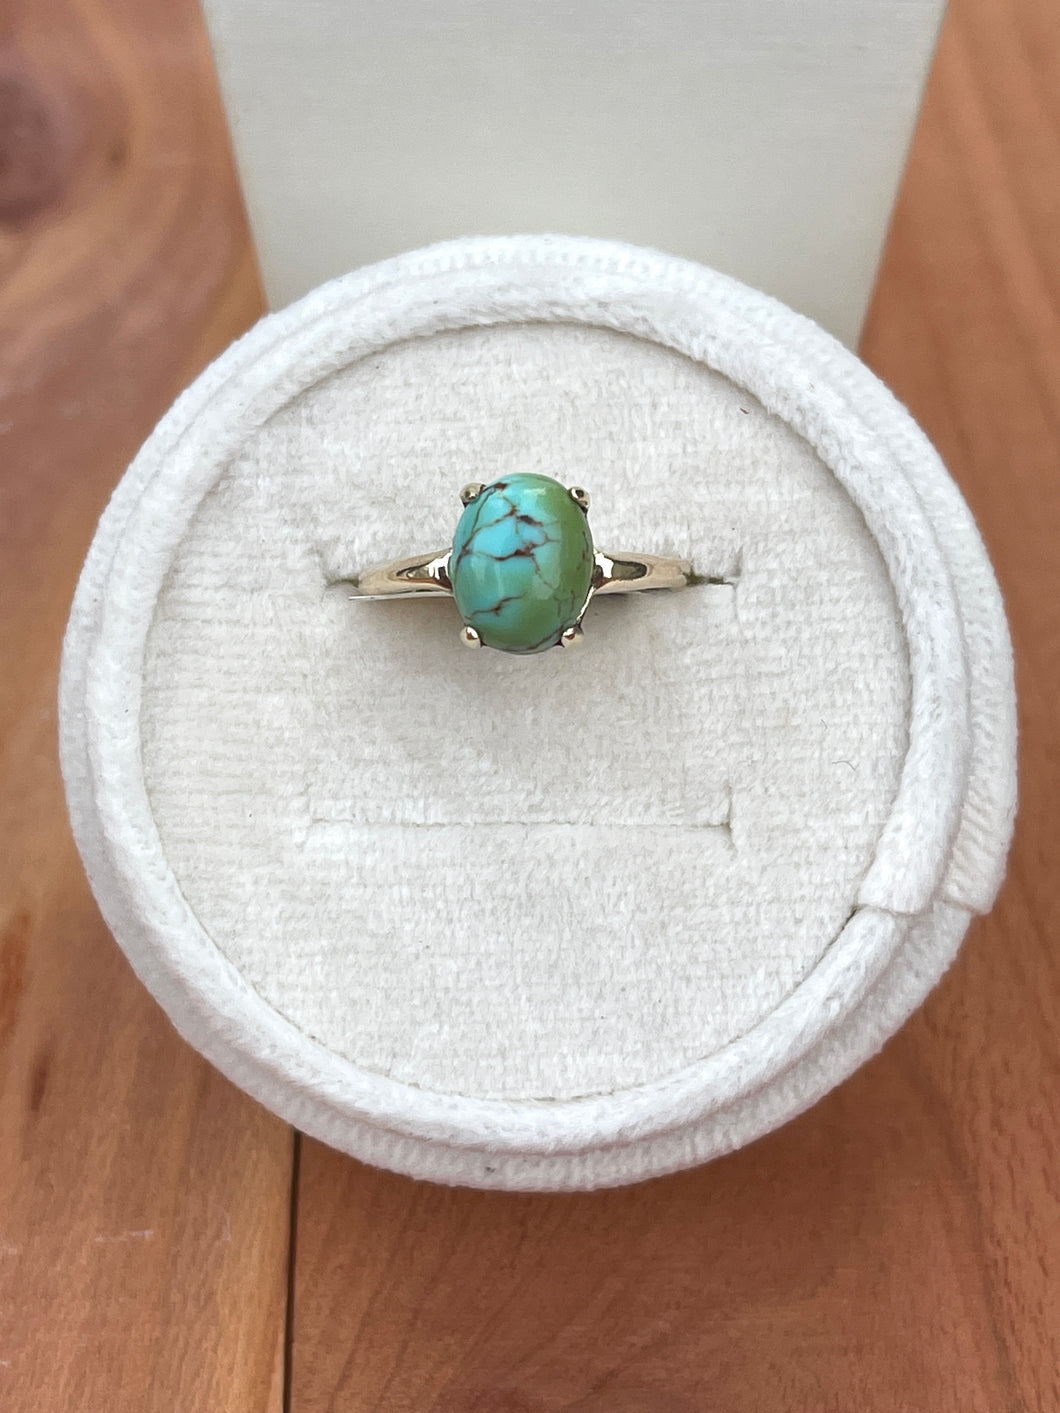 10 Karat Yellow Gold Ring with Turquoise Stone